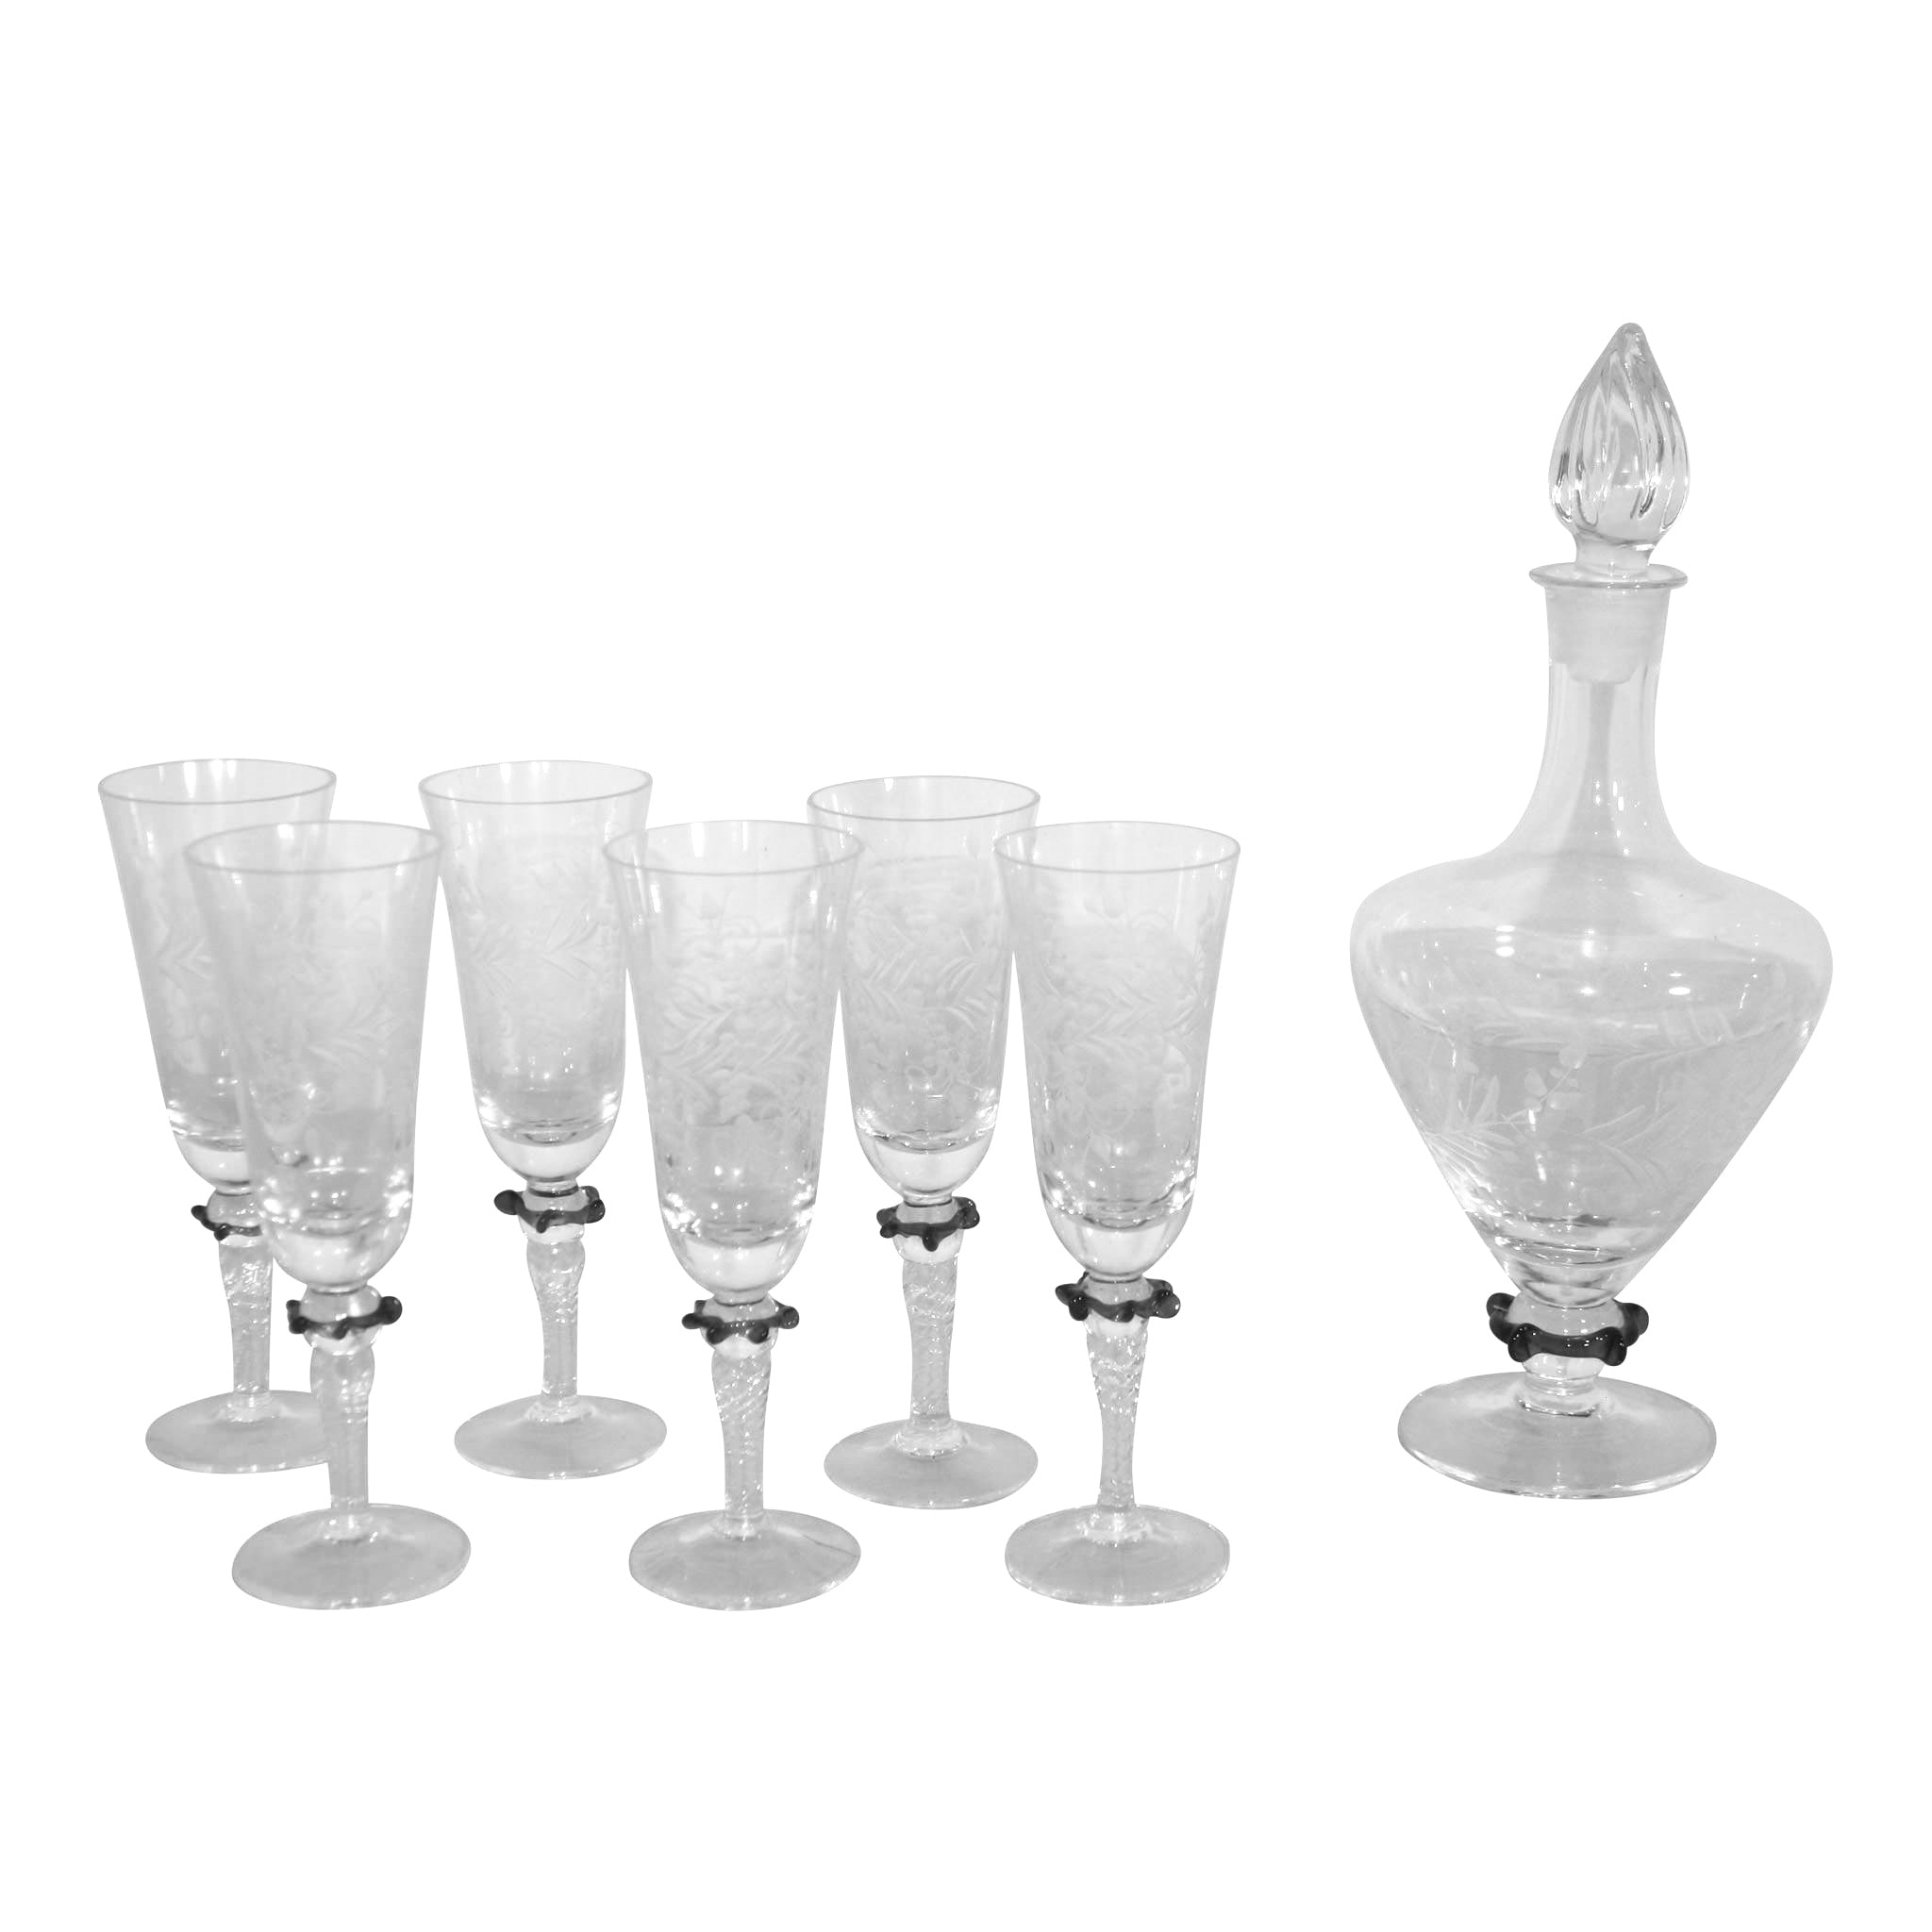 Etched Decanter and Six Champagne Glasses